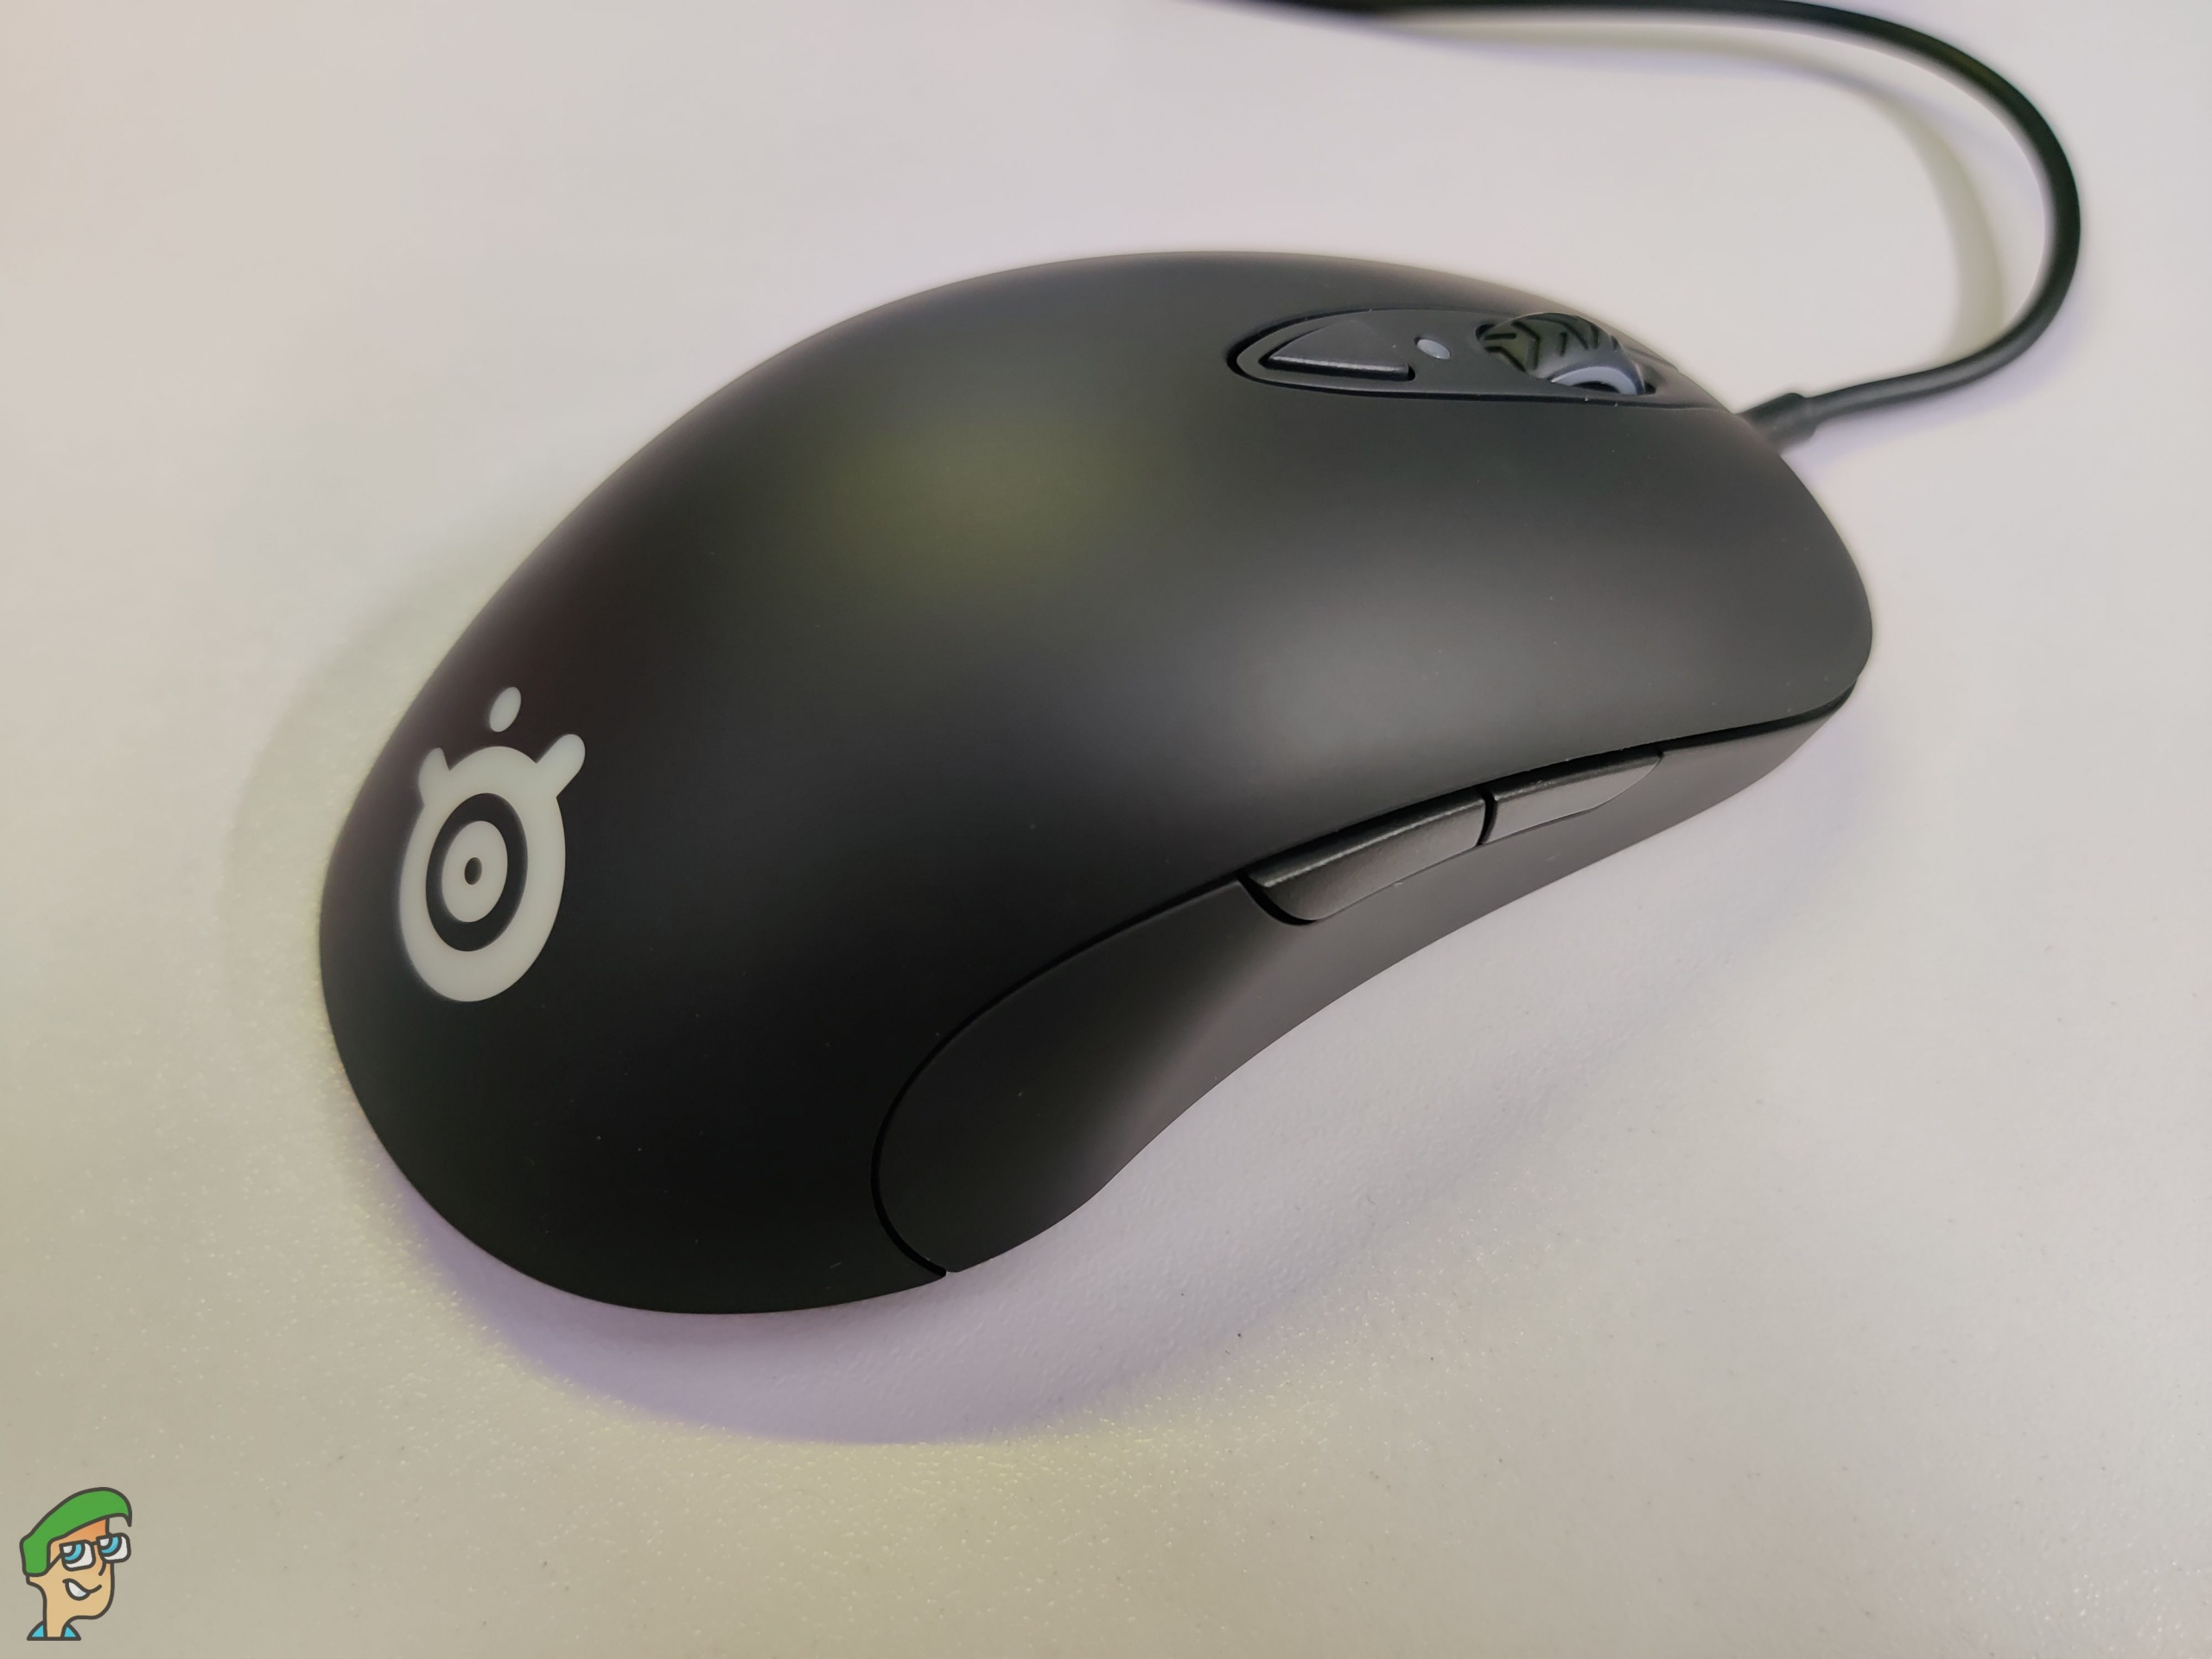 Person in charge of sports game pistol Flatter SteelSeries Sensei 10 Gaming Mouse Review - Appuals.com